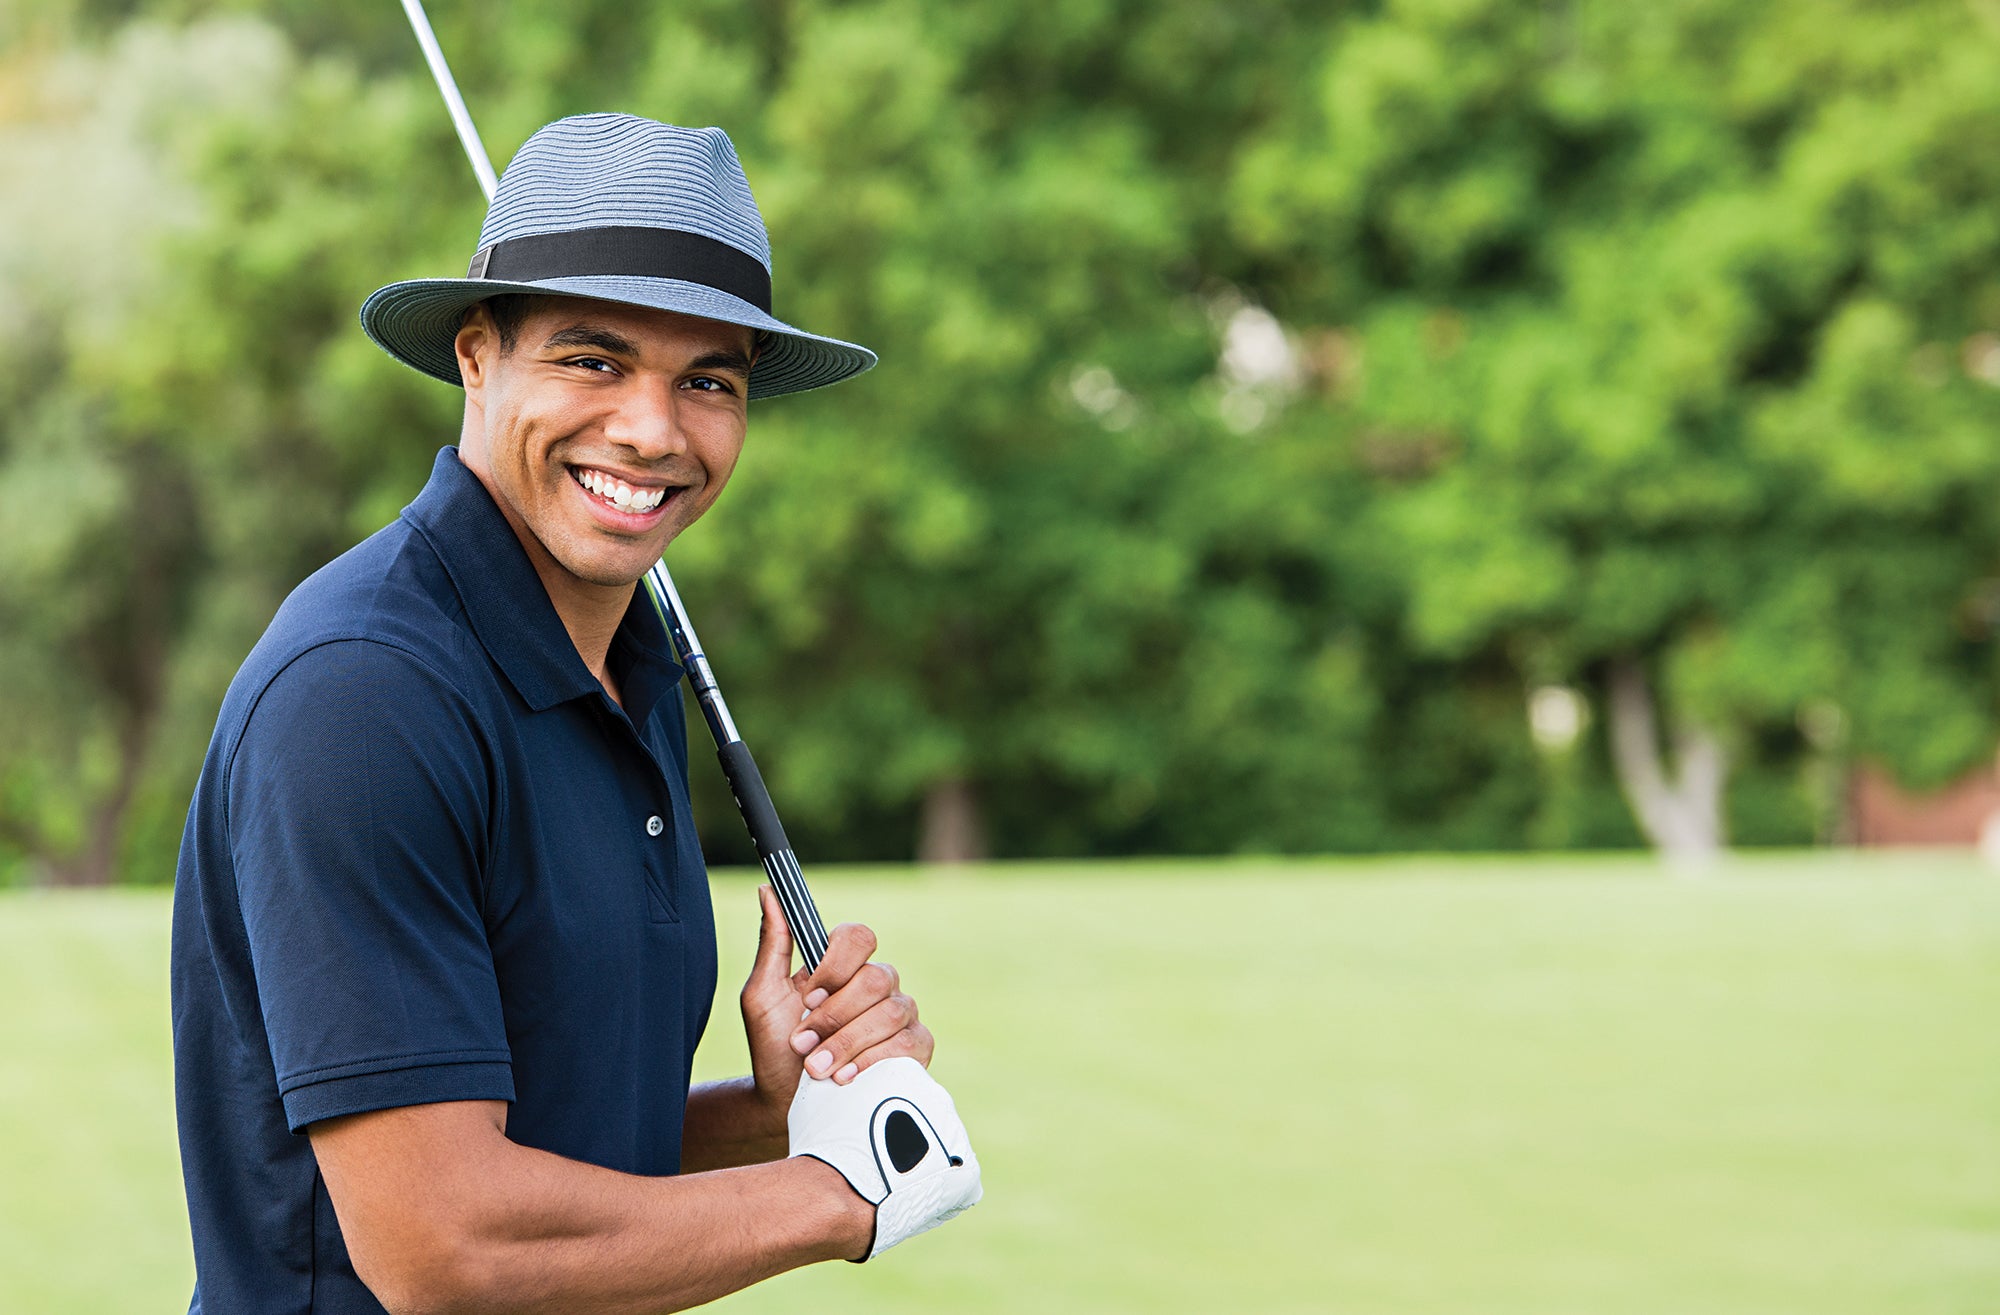 Man ready to swing a golf club on the course standing Wearing a Carkella Fairway Summer Sun hat 